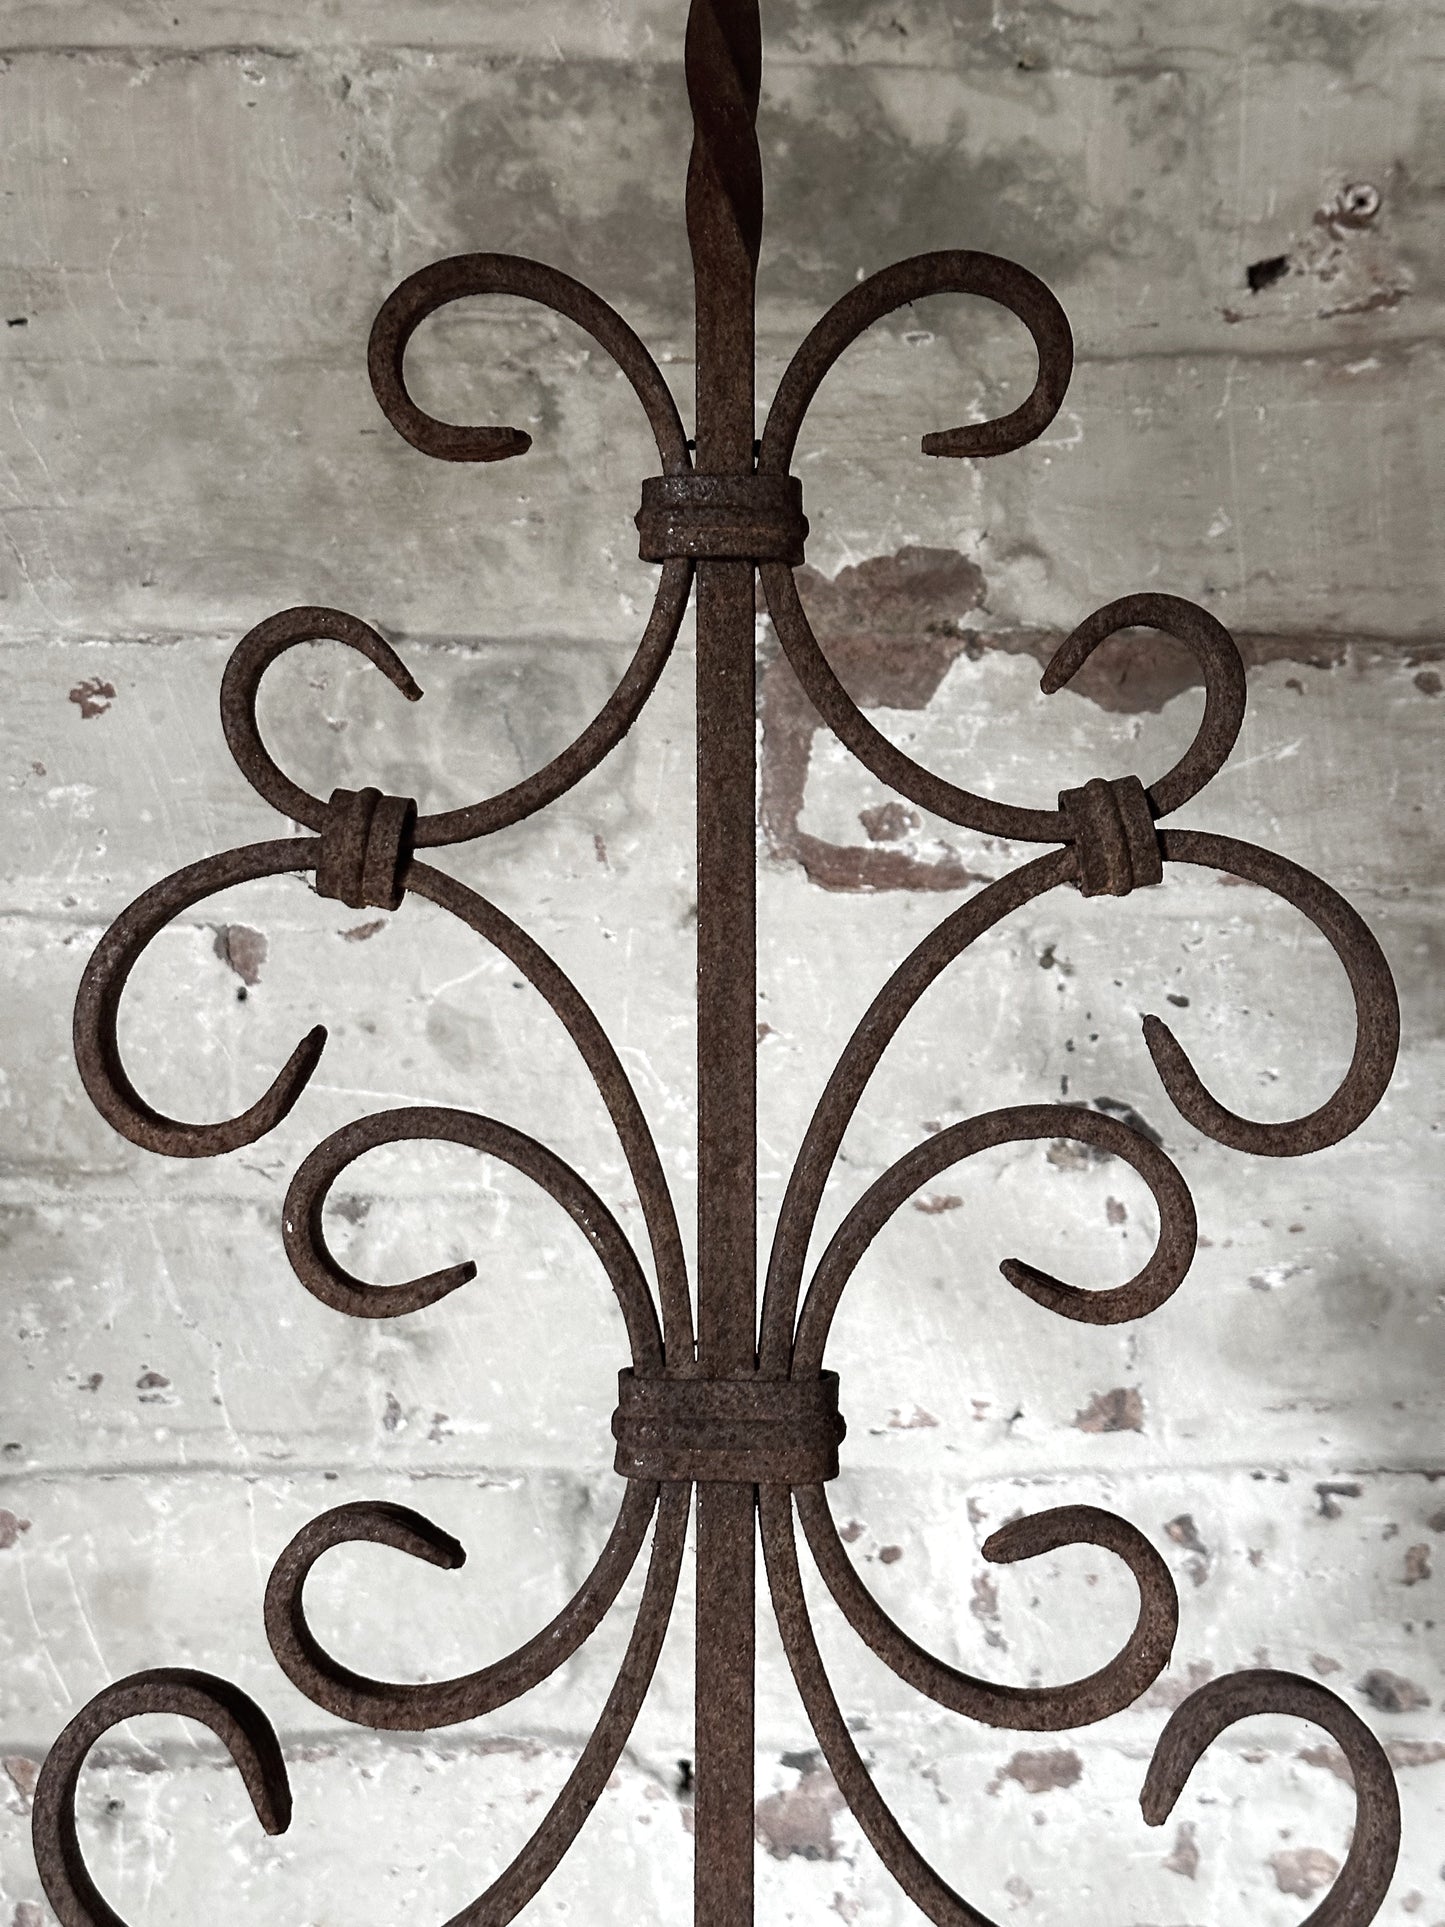 Antique French Forged Balcony Spindle or Balustrade